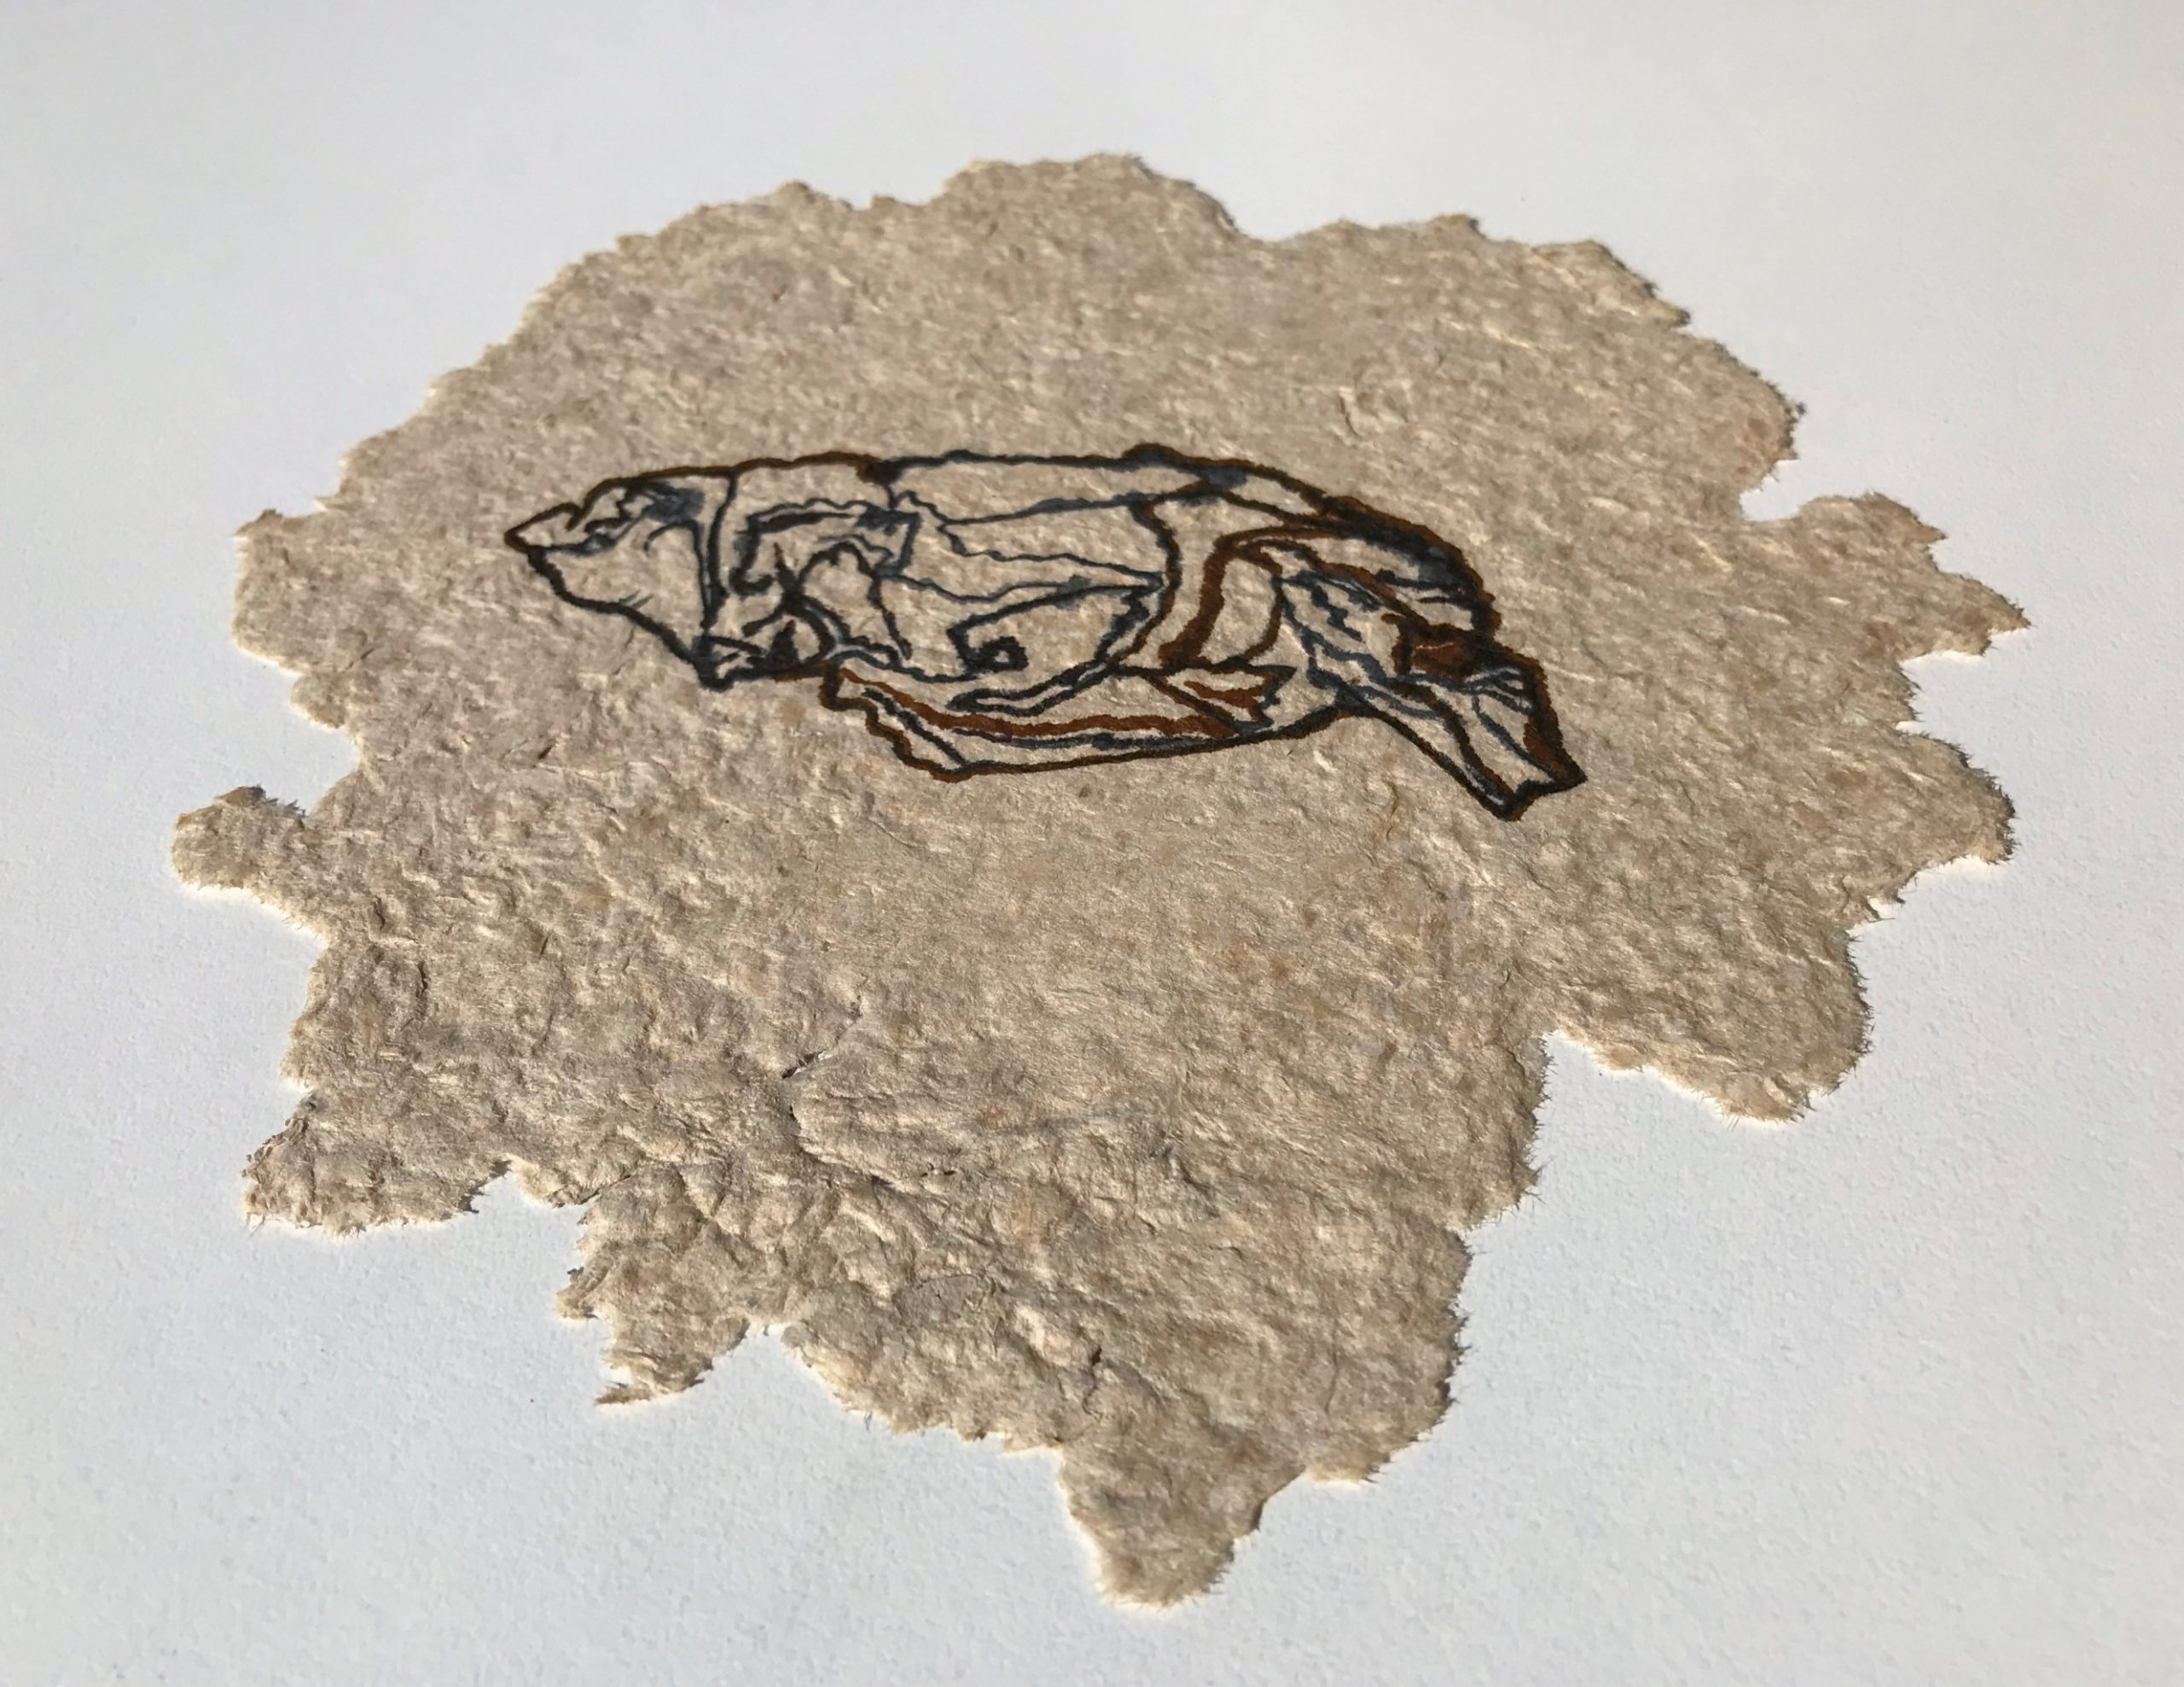 A piece of remade paper, with a drawing of the original crumpled leaflet